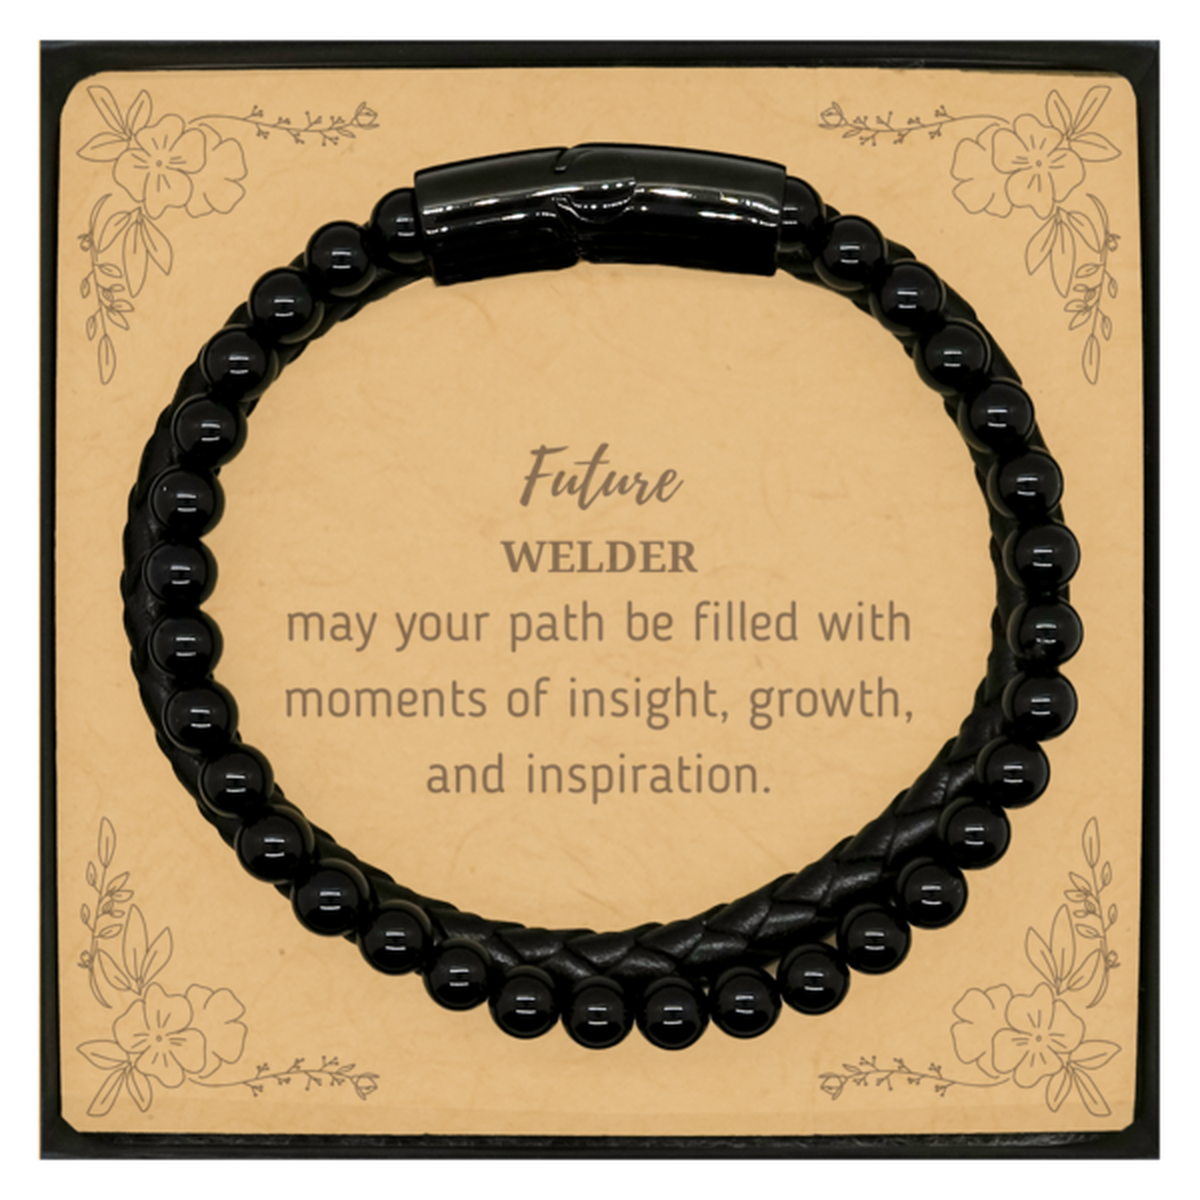 Future Welder Gifts, May your path be filled with moments of insight, Graduation Gifts for New Welder, Christmas Unique Stone Leather Bracelets For Men, Women, Friends